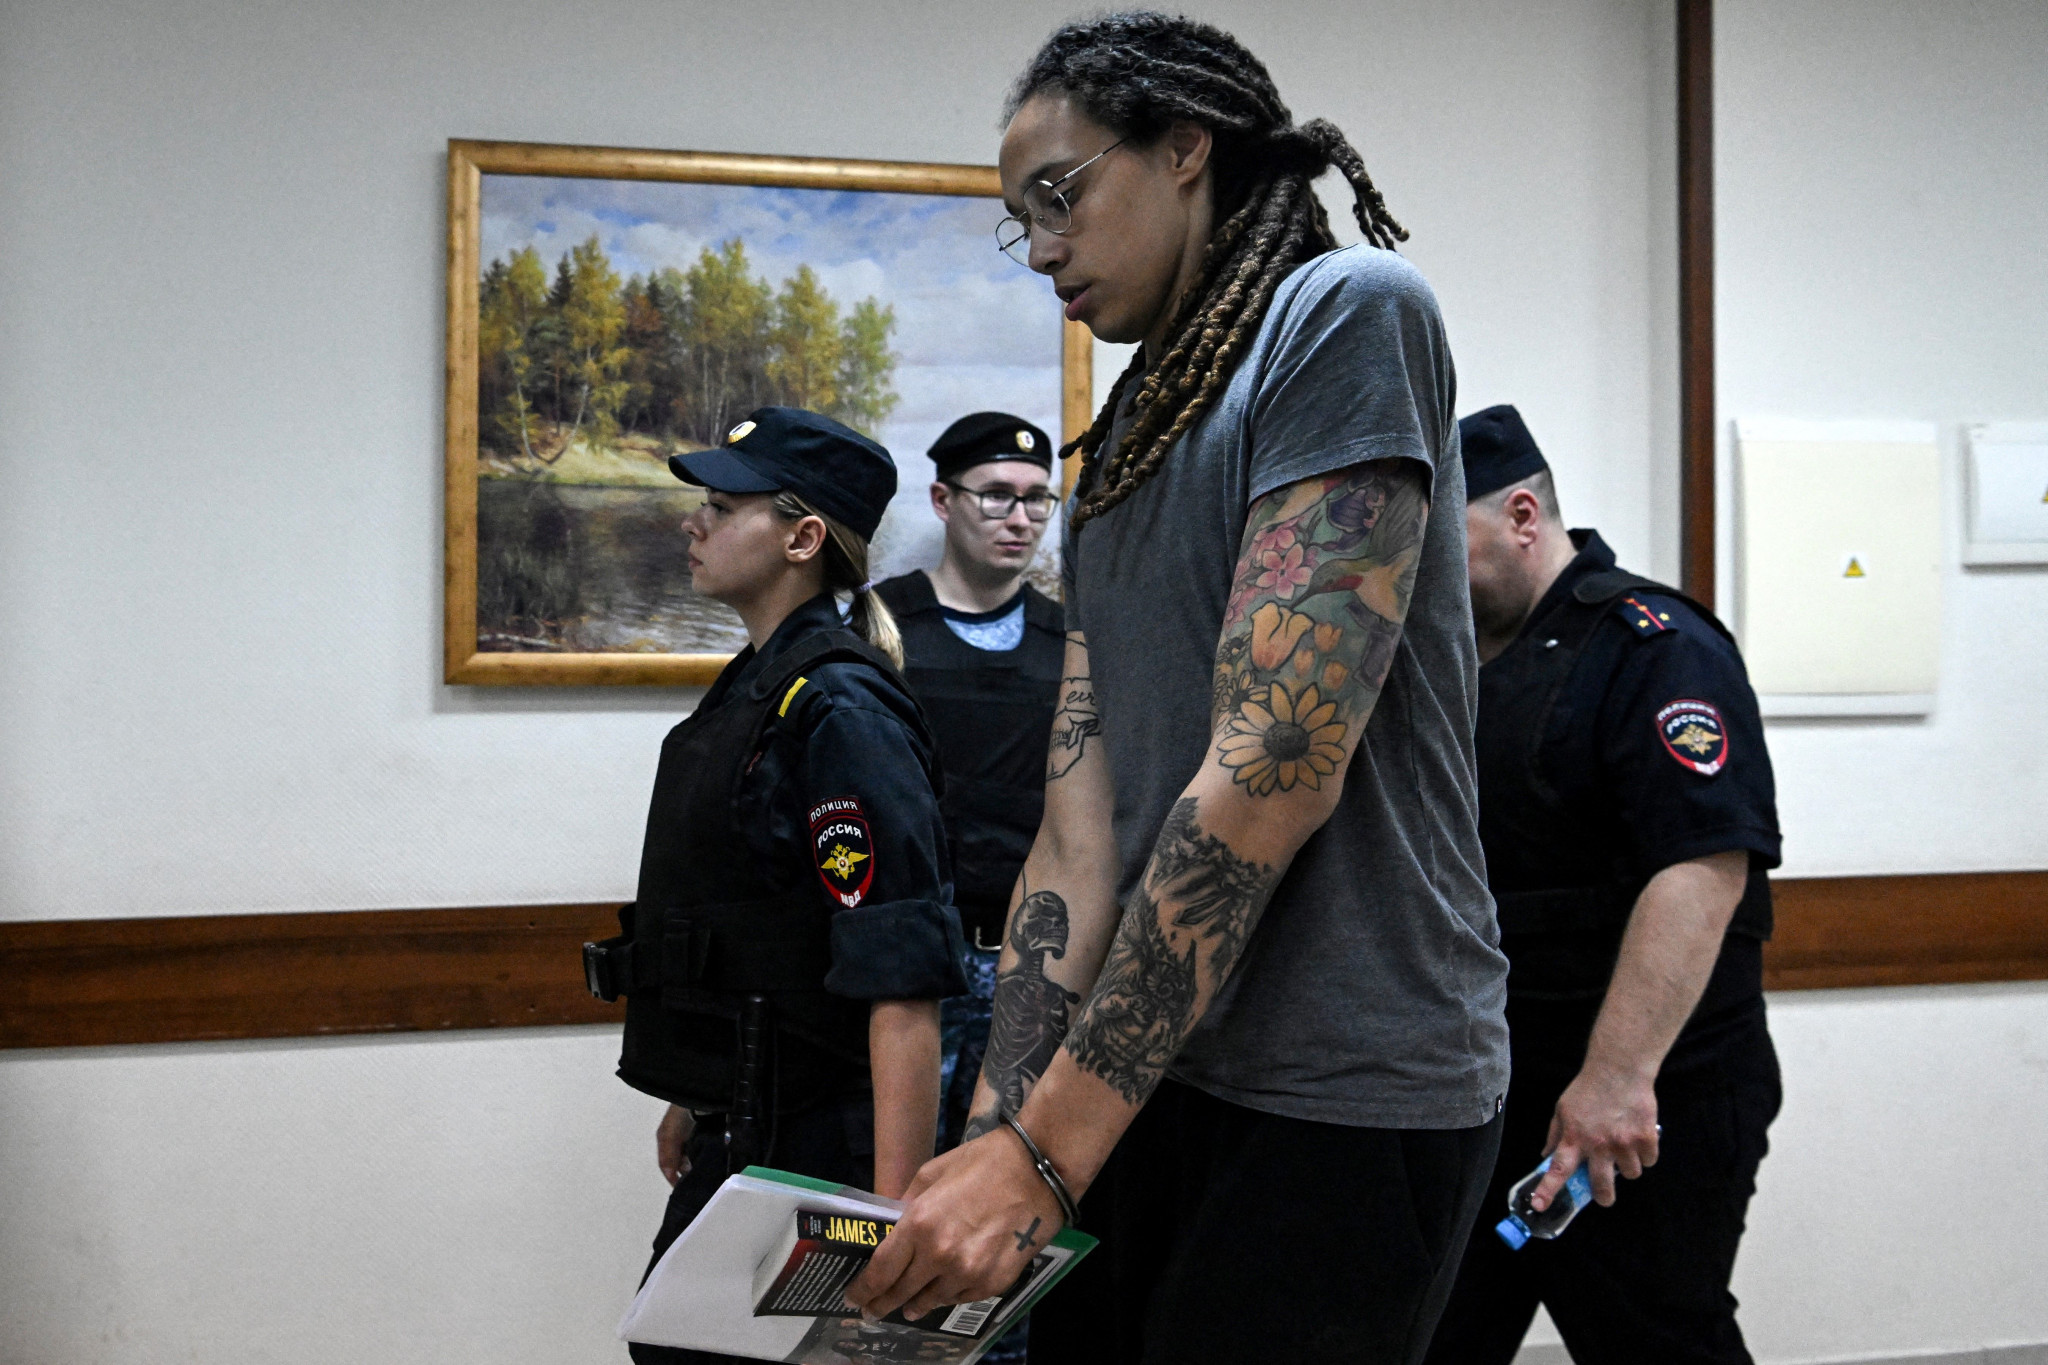 Brittney Griner spent 10 months in detention before being exchanged for Russian arms dealer Viktor Bout in a prisoner swap between the US and Russia ©Getty Images